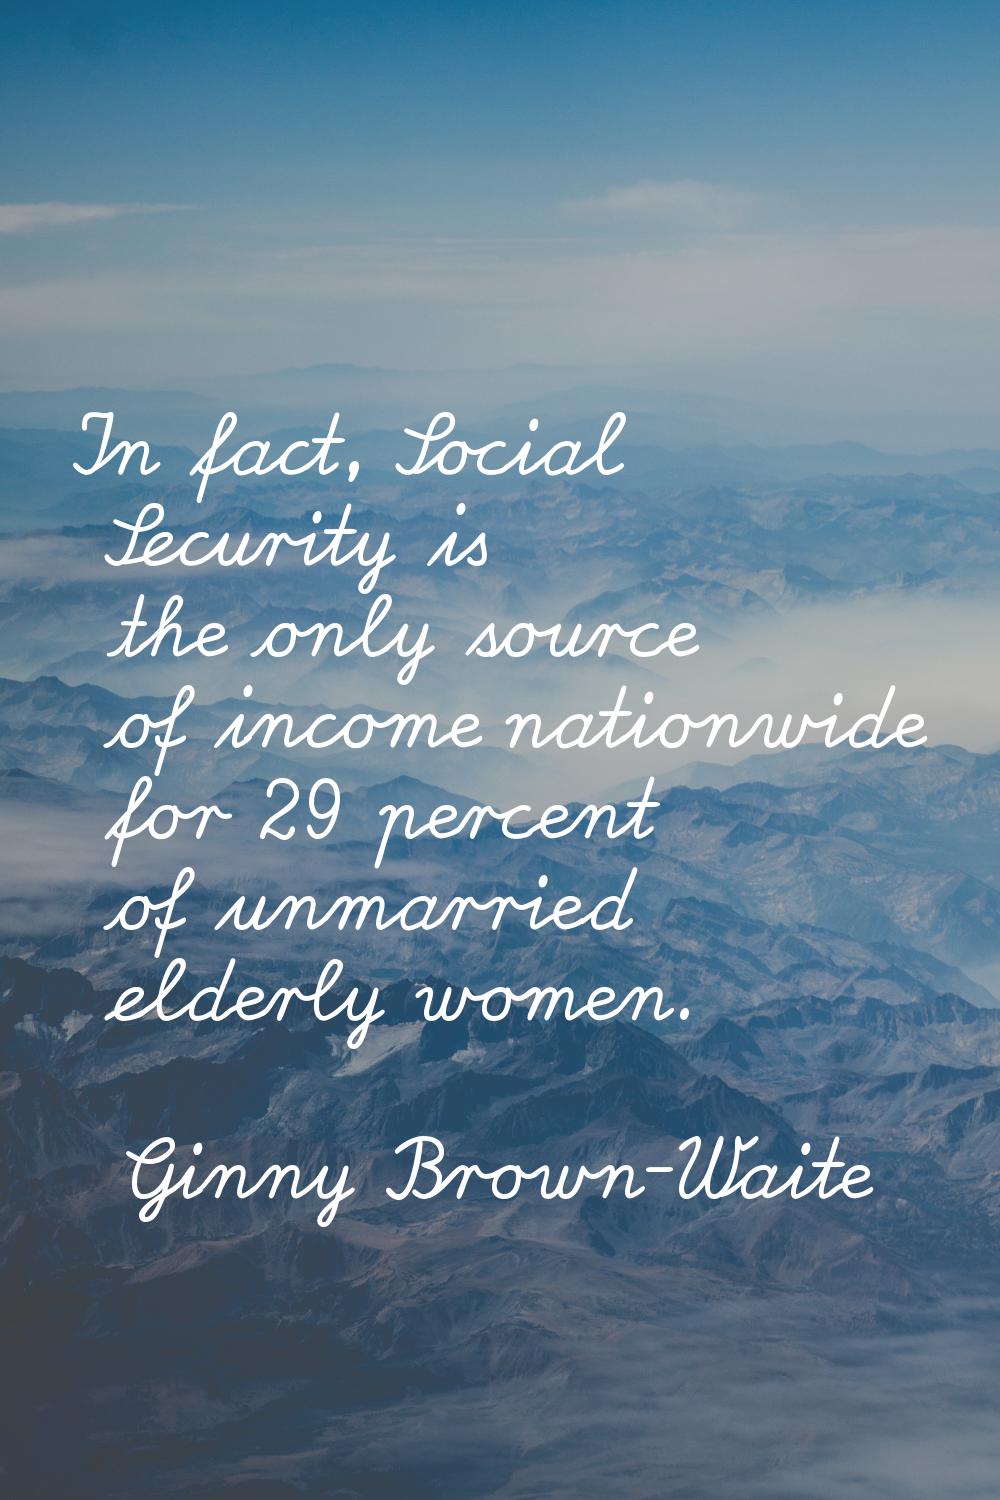 In fact, Social Security is the only source of income nationwide for 29 percent of unmarried elderl